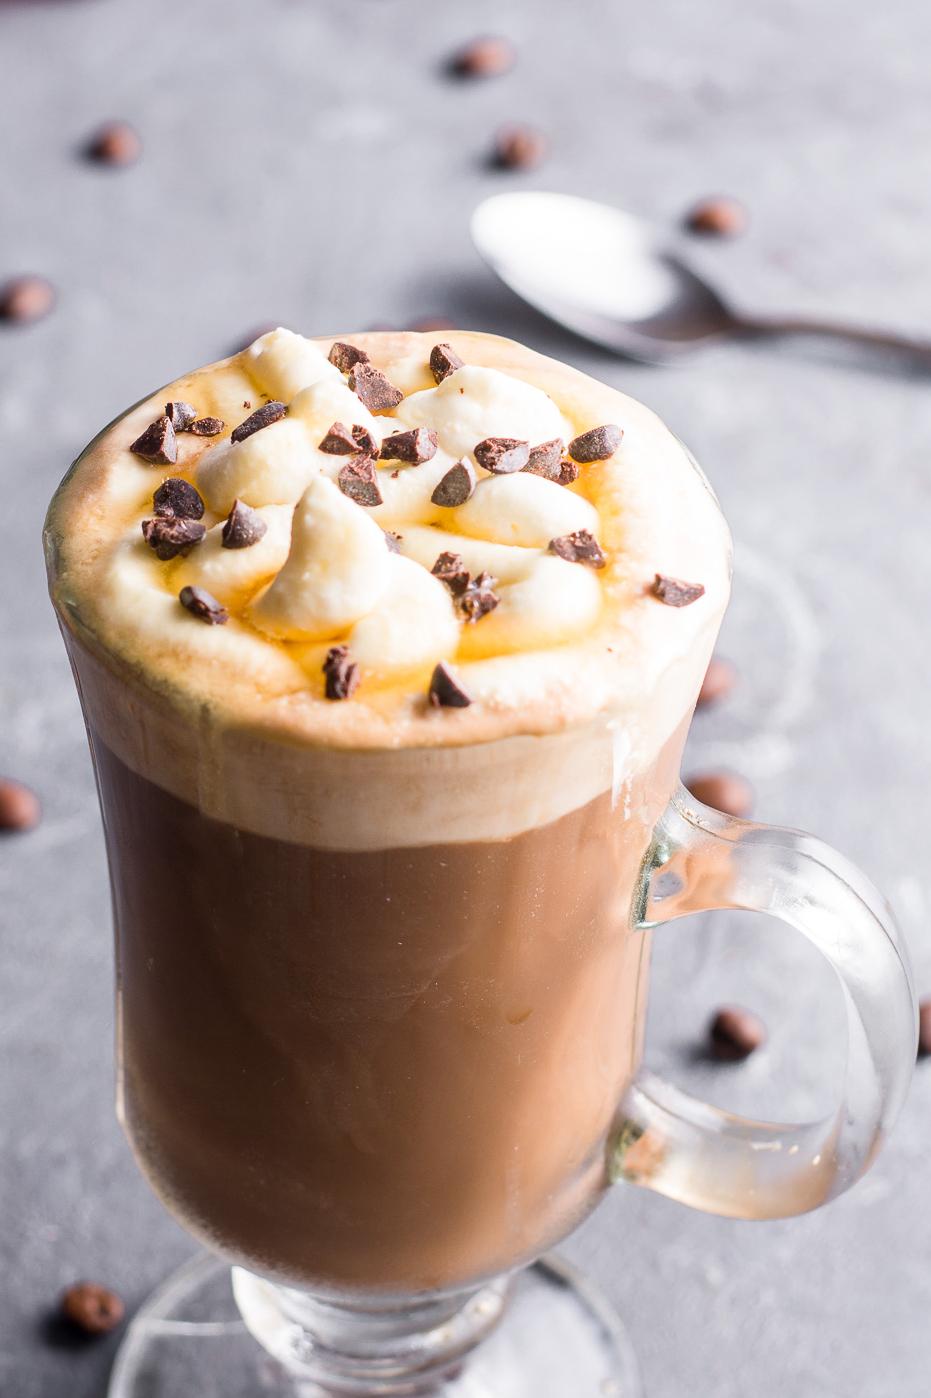  Comfort in a cup: Mocha Nut Caffe.